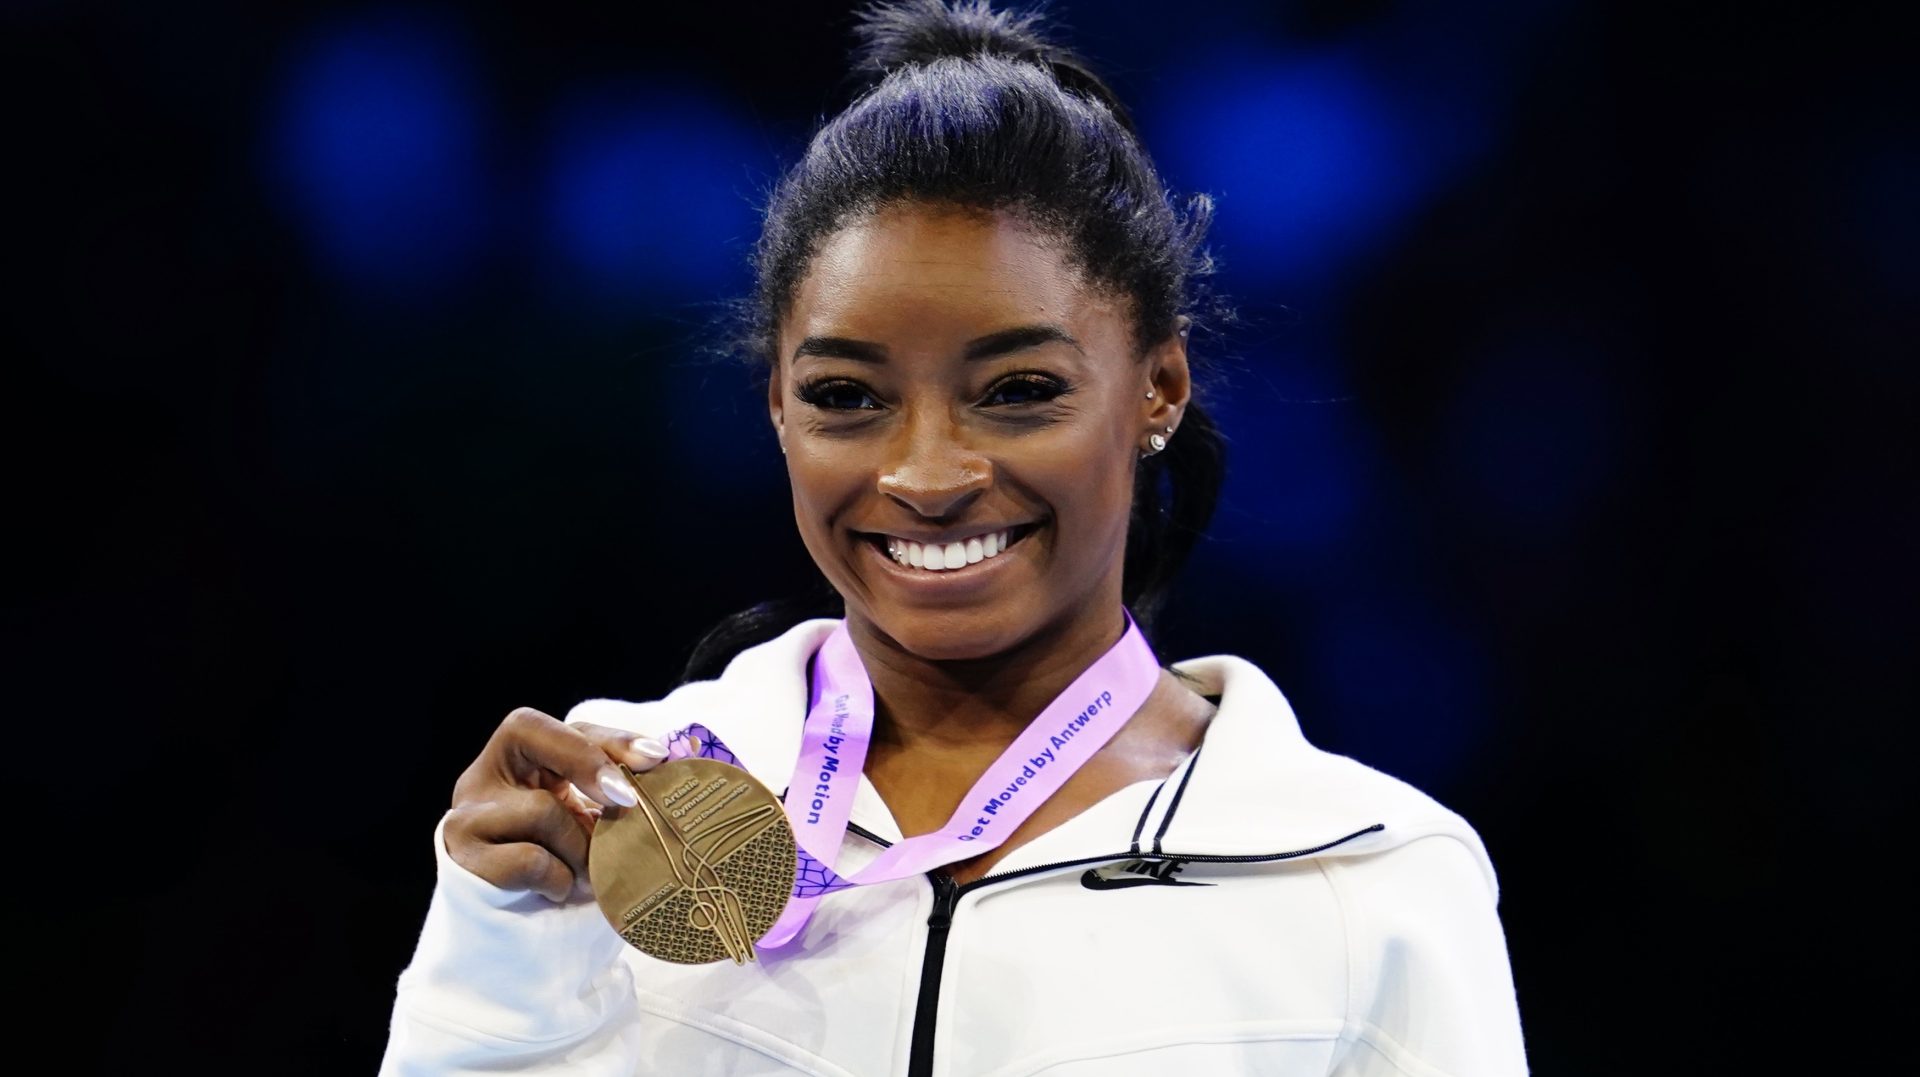 Simone Biles Is Now The Most Decorated Gymnast In History!